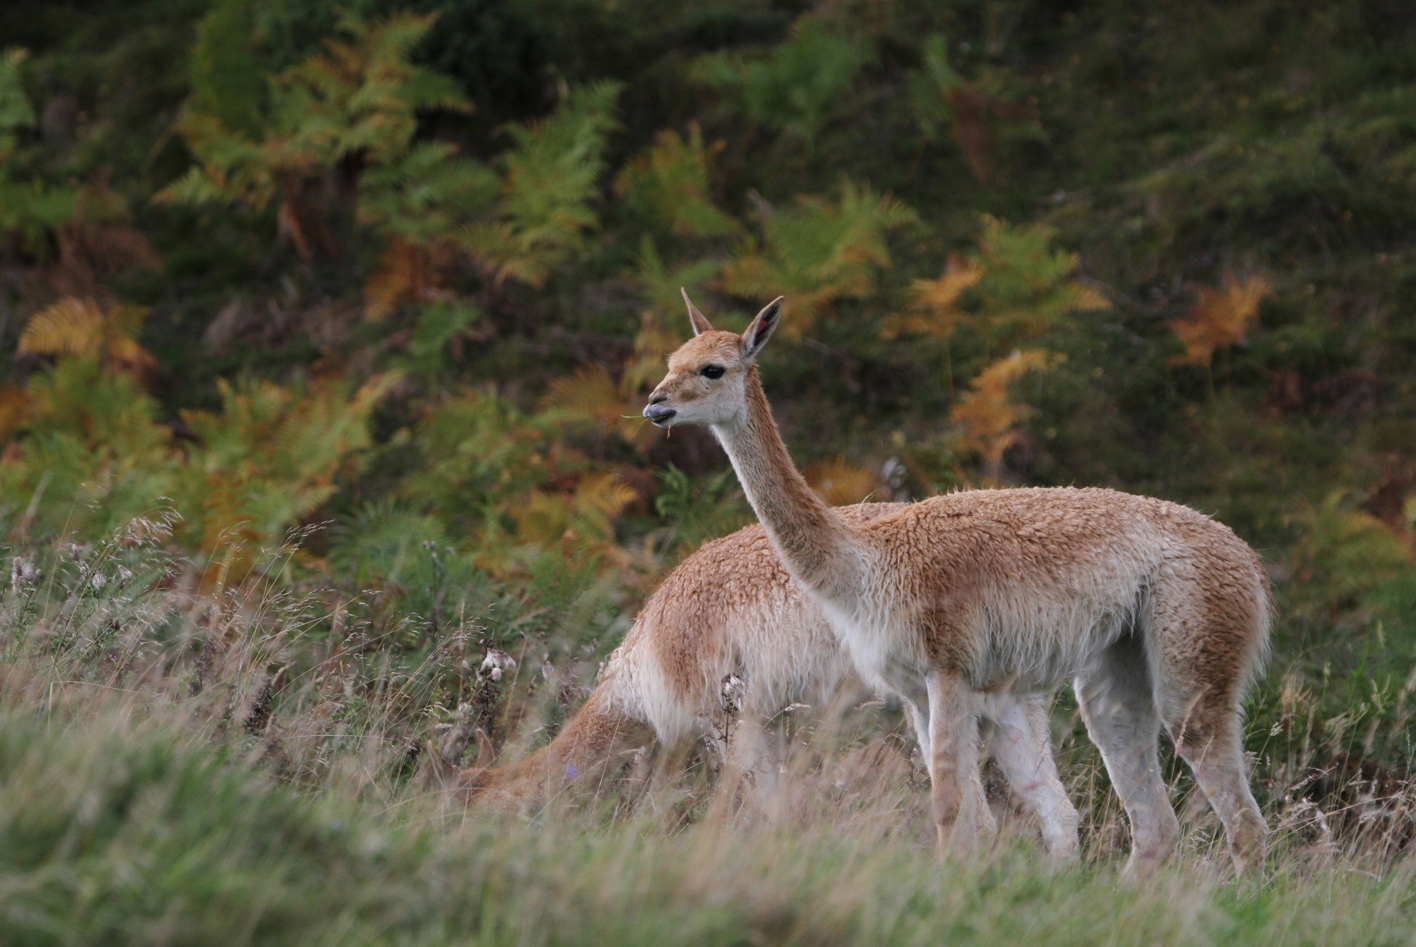 Two members of vicuna herd one with head down and one looking up with some grass in its mouth

Image: LAURA MOORE 2023